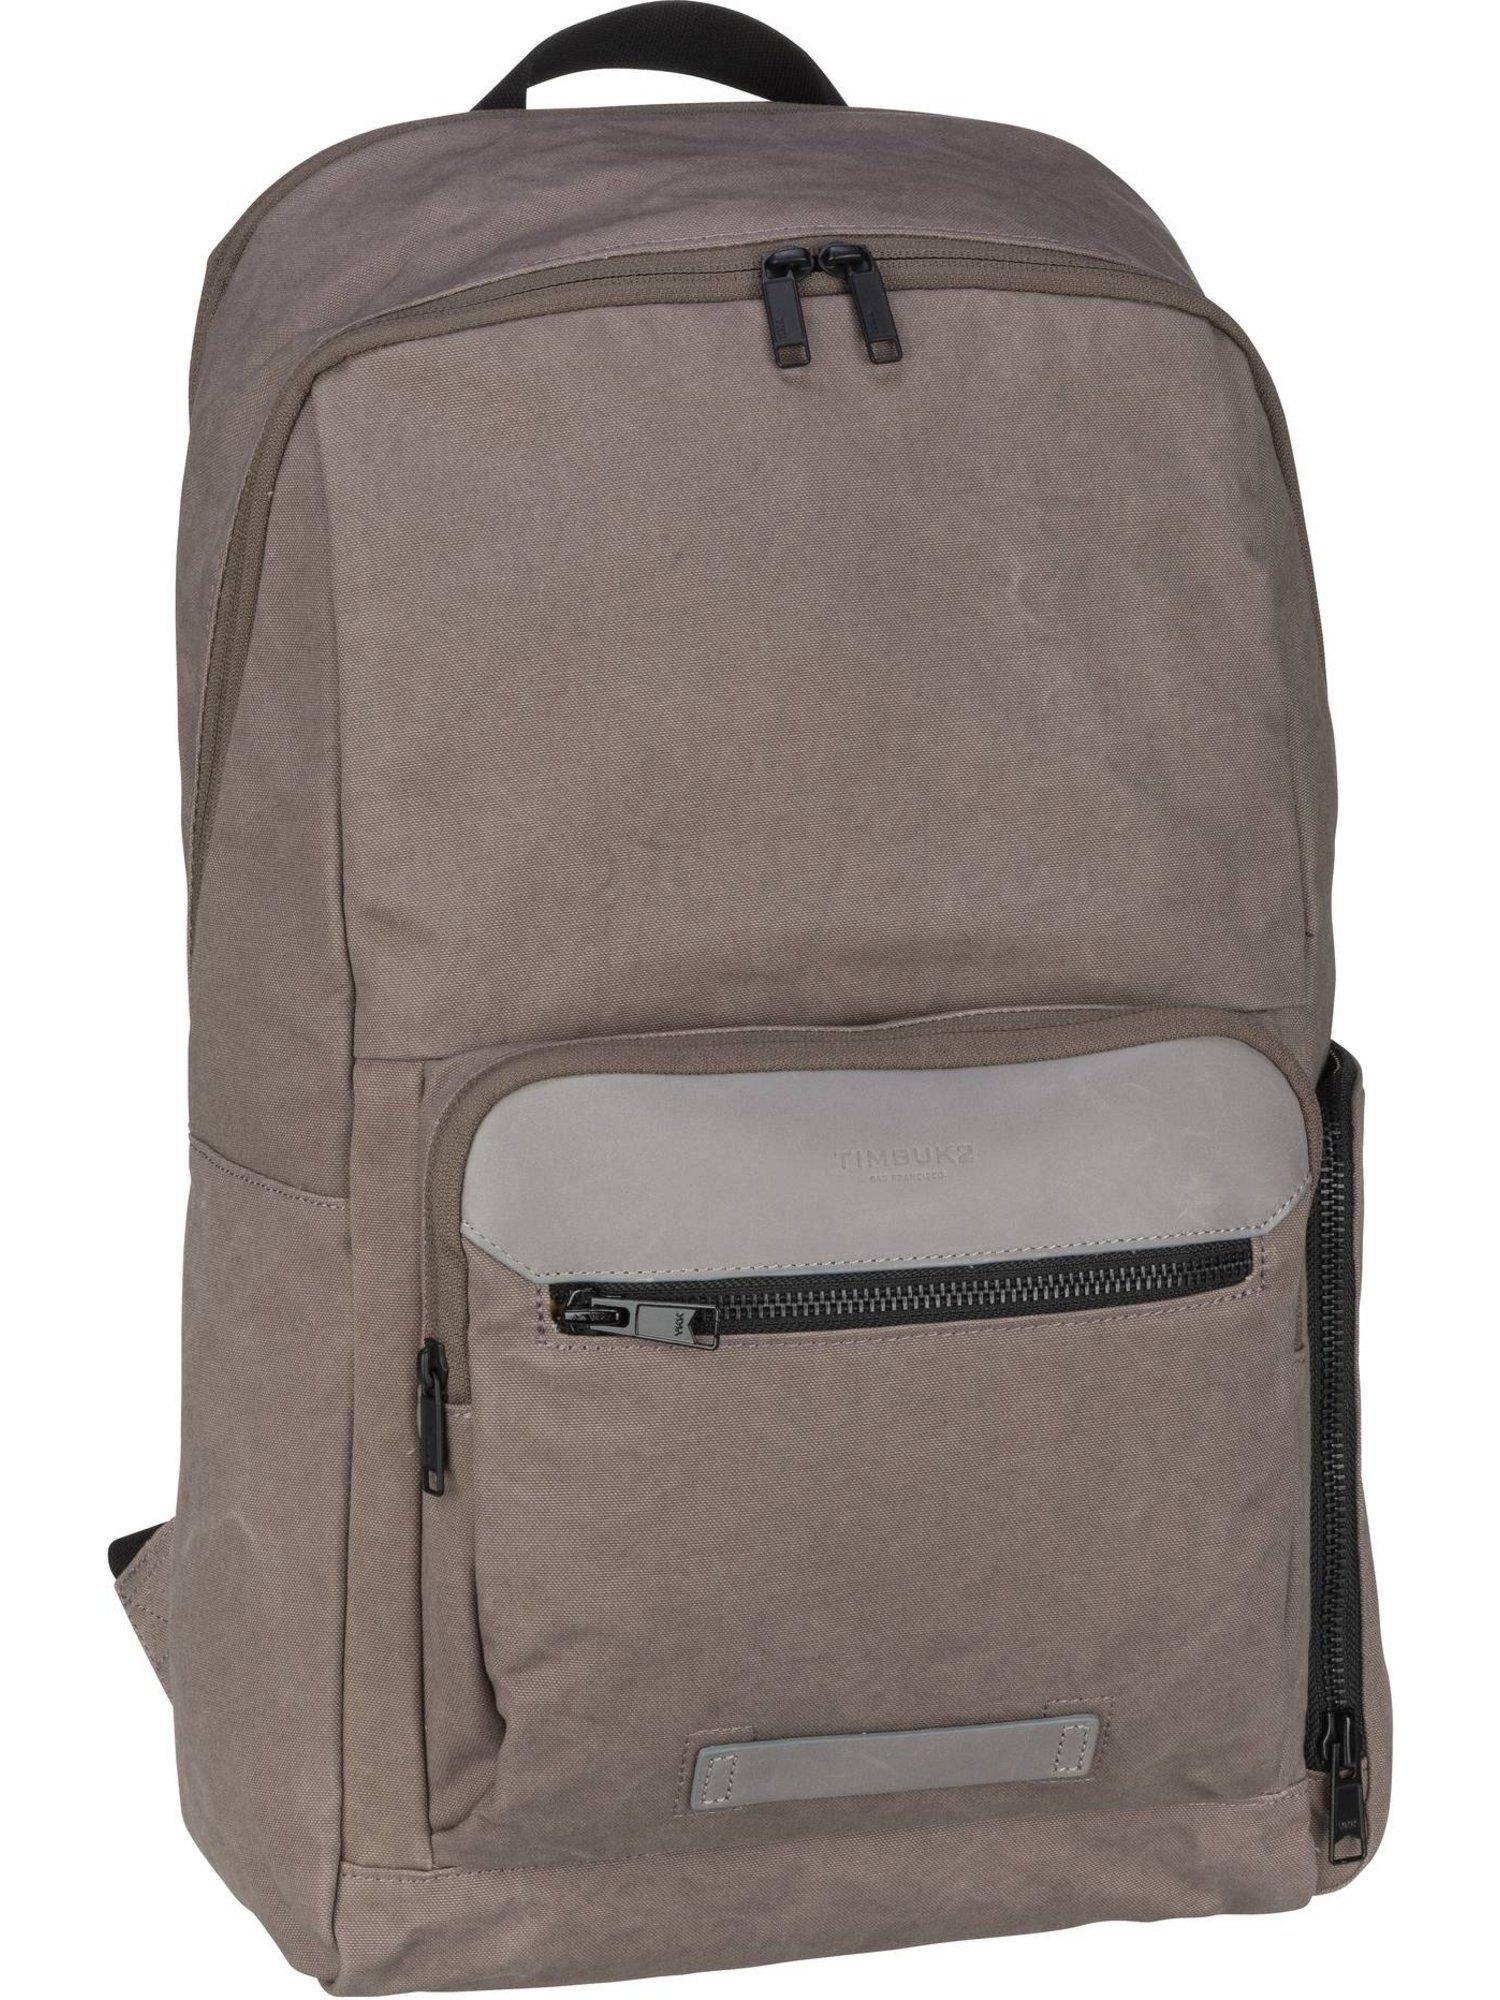 Timbuk2 Rucksack »Project Backpack« online kaufen | OTTO